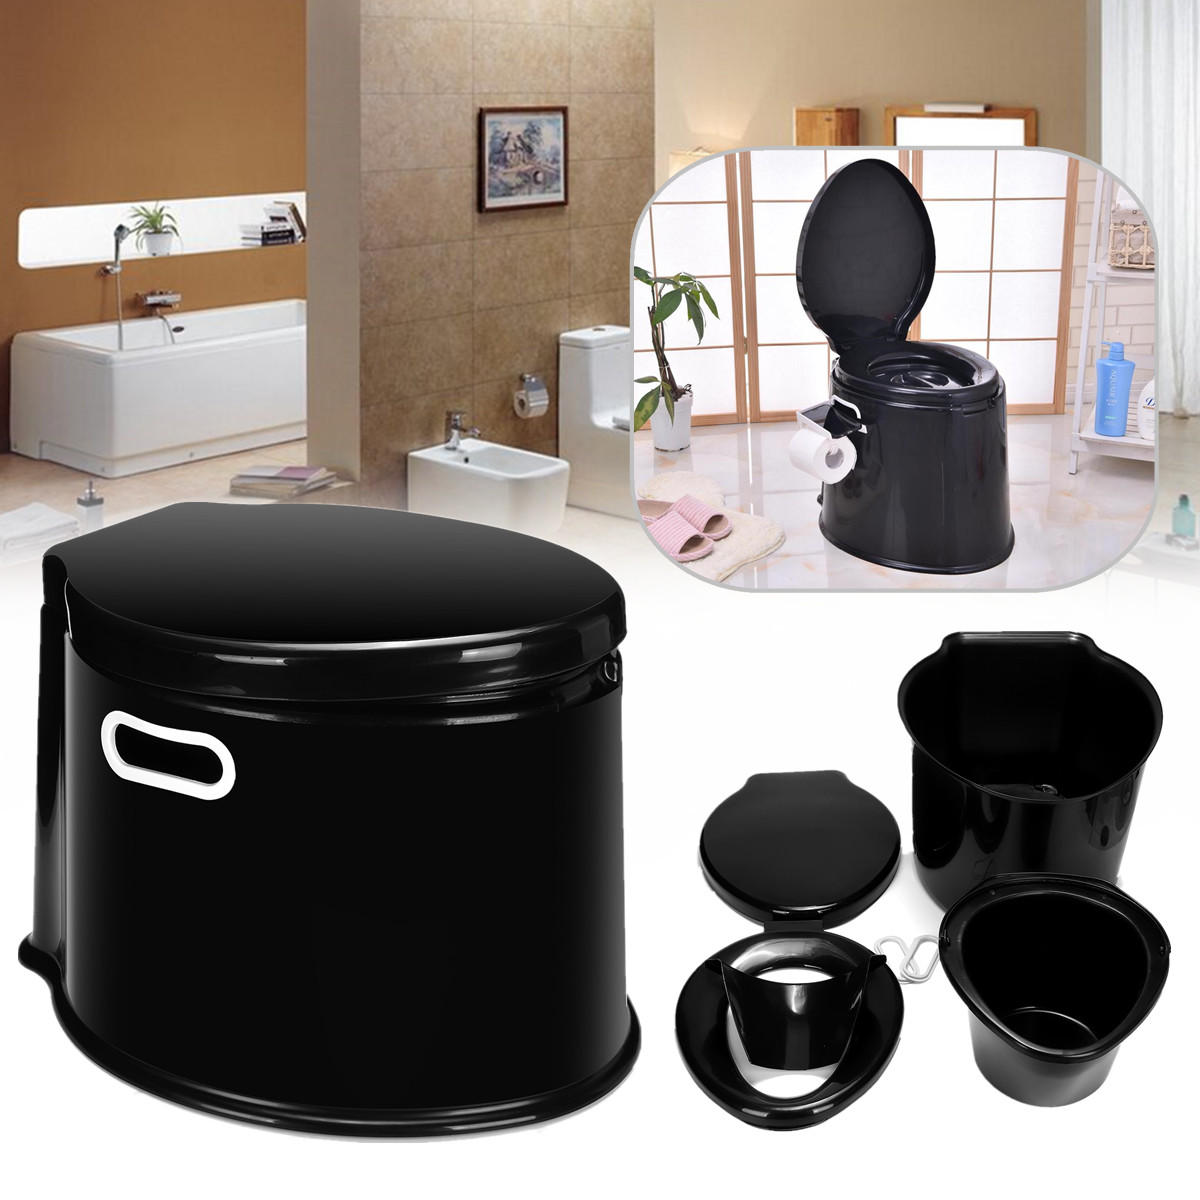 Outdoor Travel Plastic 5 Litre Camp Toilet Portable Camping RV Caravan Commode With Paper Hook